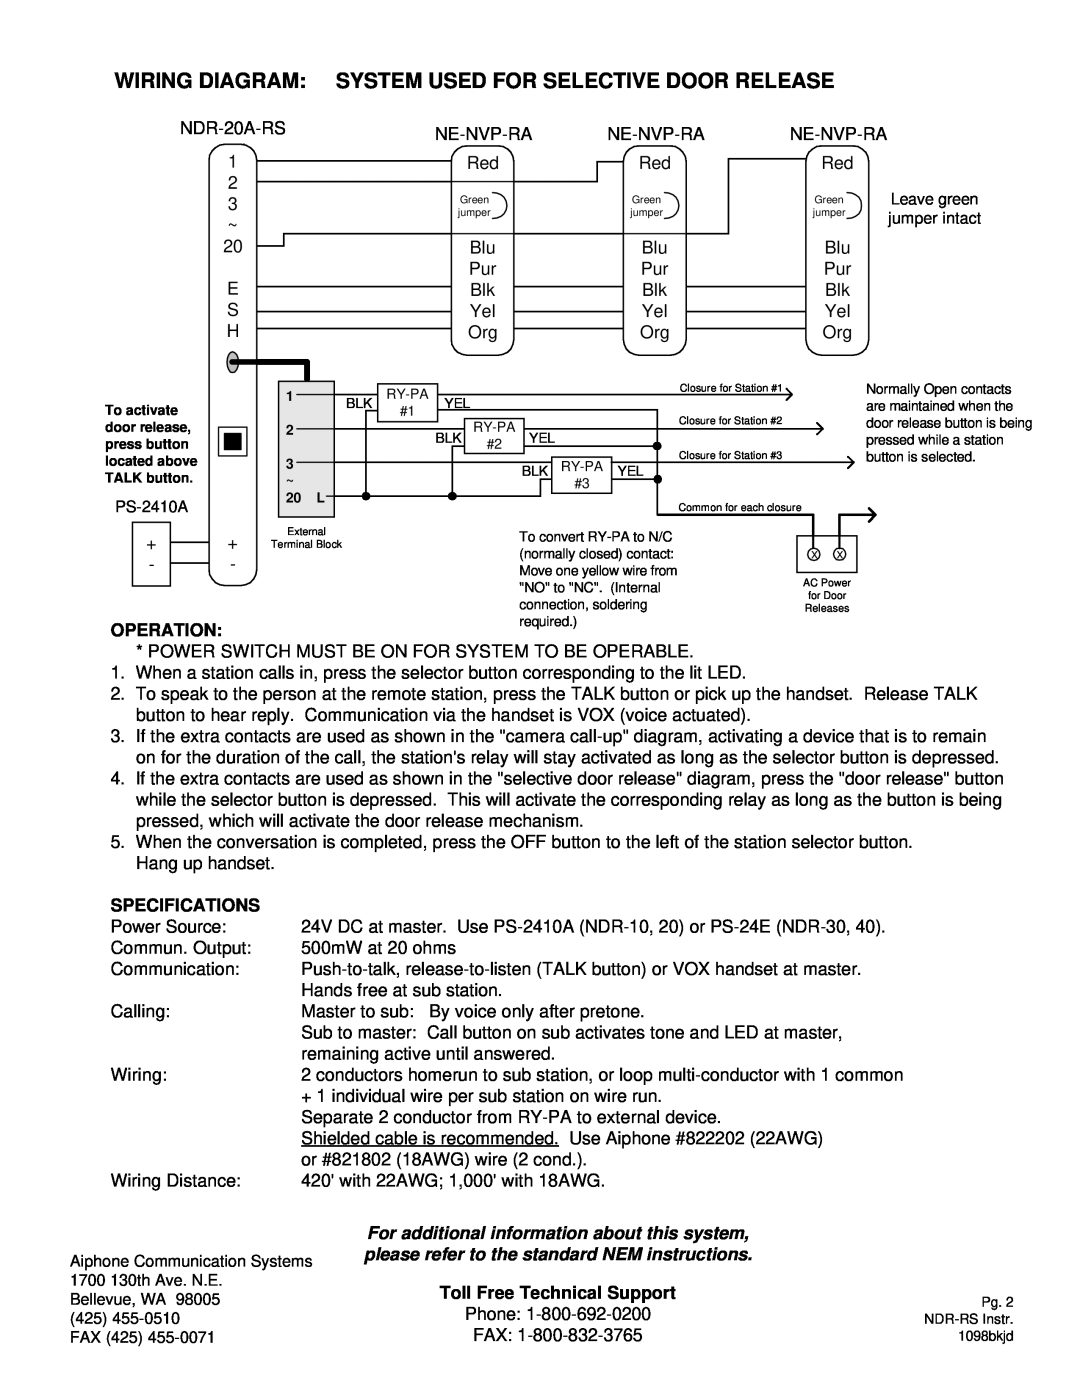 Aiphone NDR-40ARS, ND-20AS, NDR-20ARS manual Wiring Diagram System Used For Selective Door Release, Operation, Specifications 